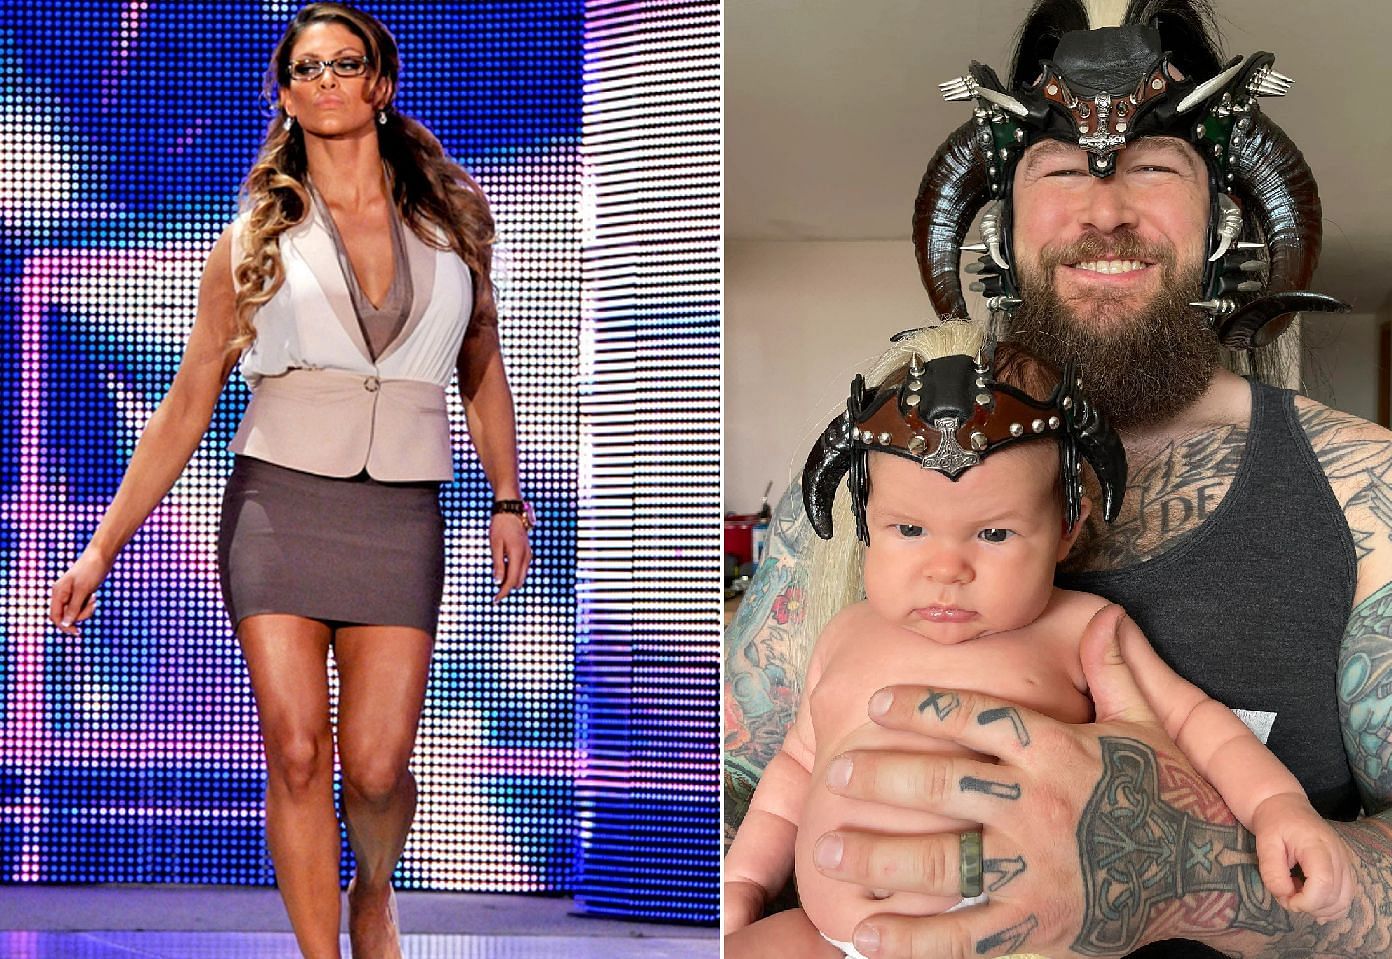 Several current and former WWE Superstars were born on the exact same day